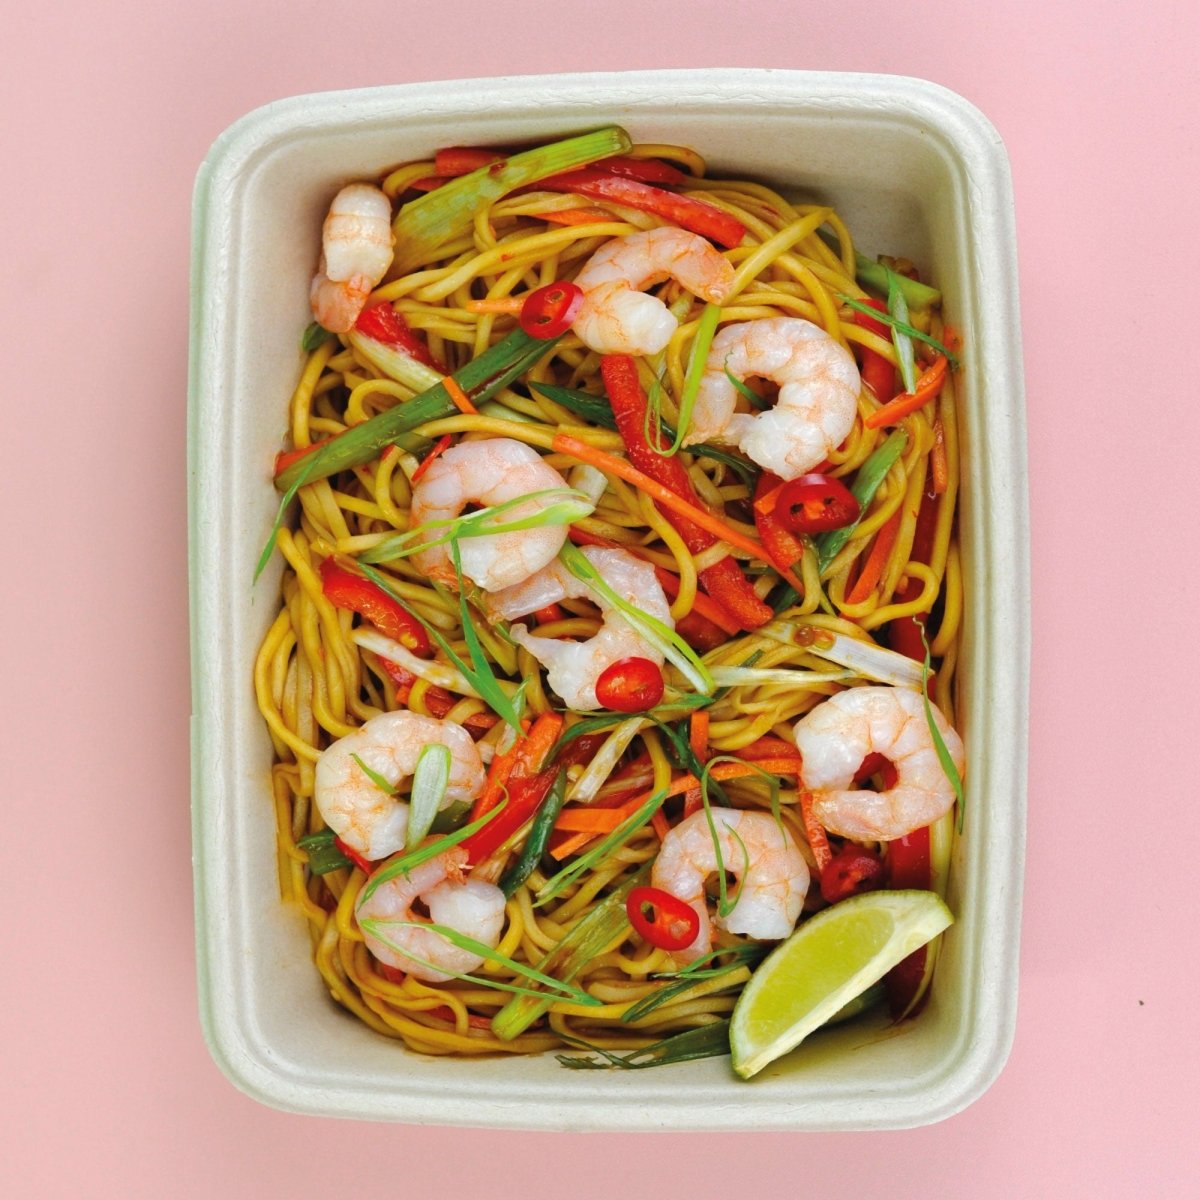 All Week Chilli Prawn and Rainbow Veg Yakisoba - All Week (formerly Out of the Box)